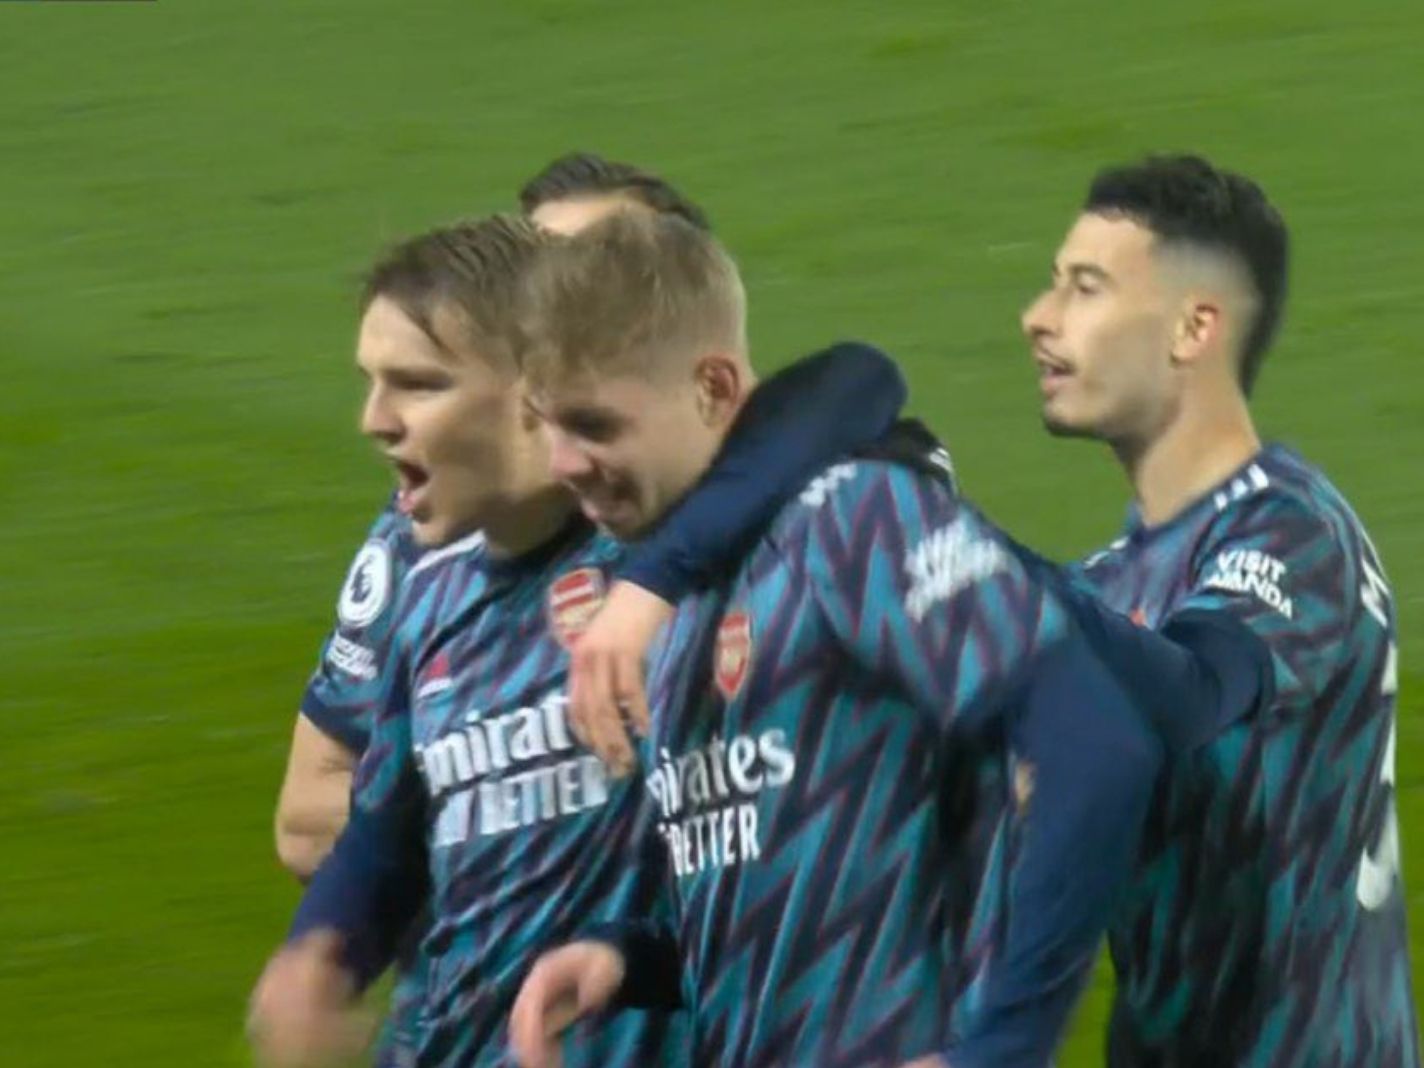 The embrace that ended all rumours of rift between Martin Odegaard and Emile Smith Rowe